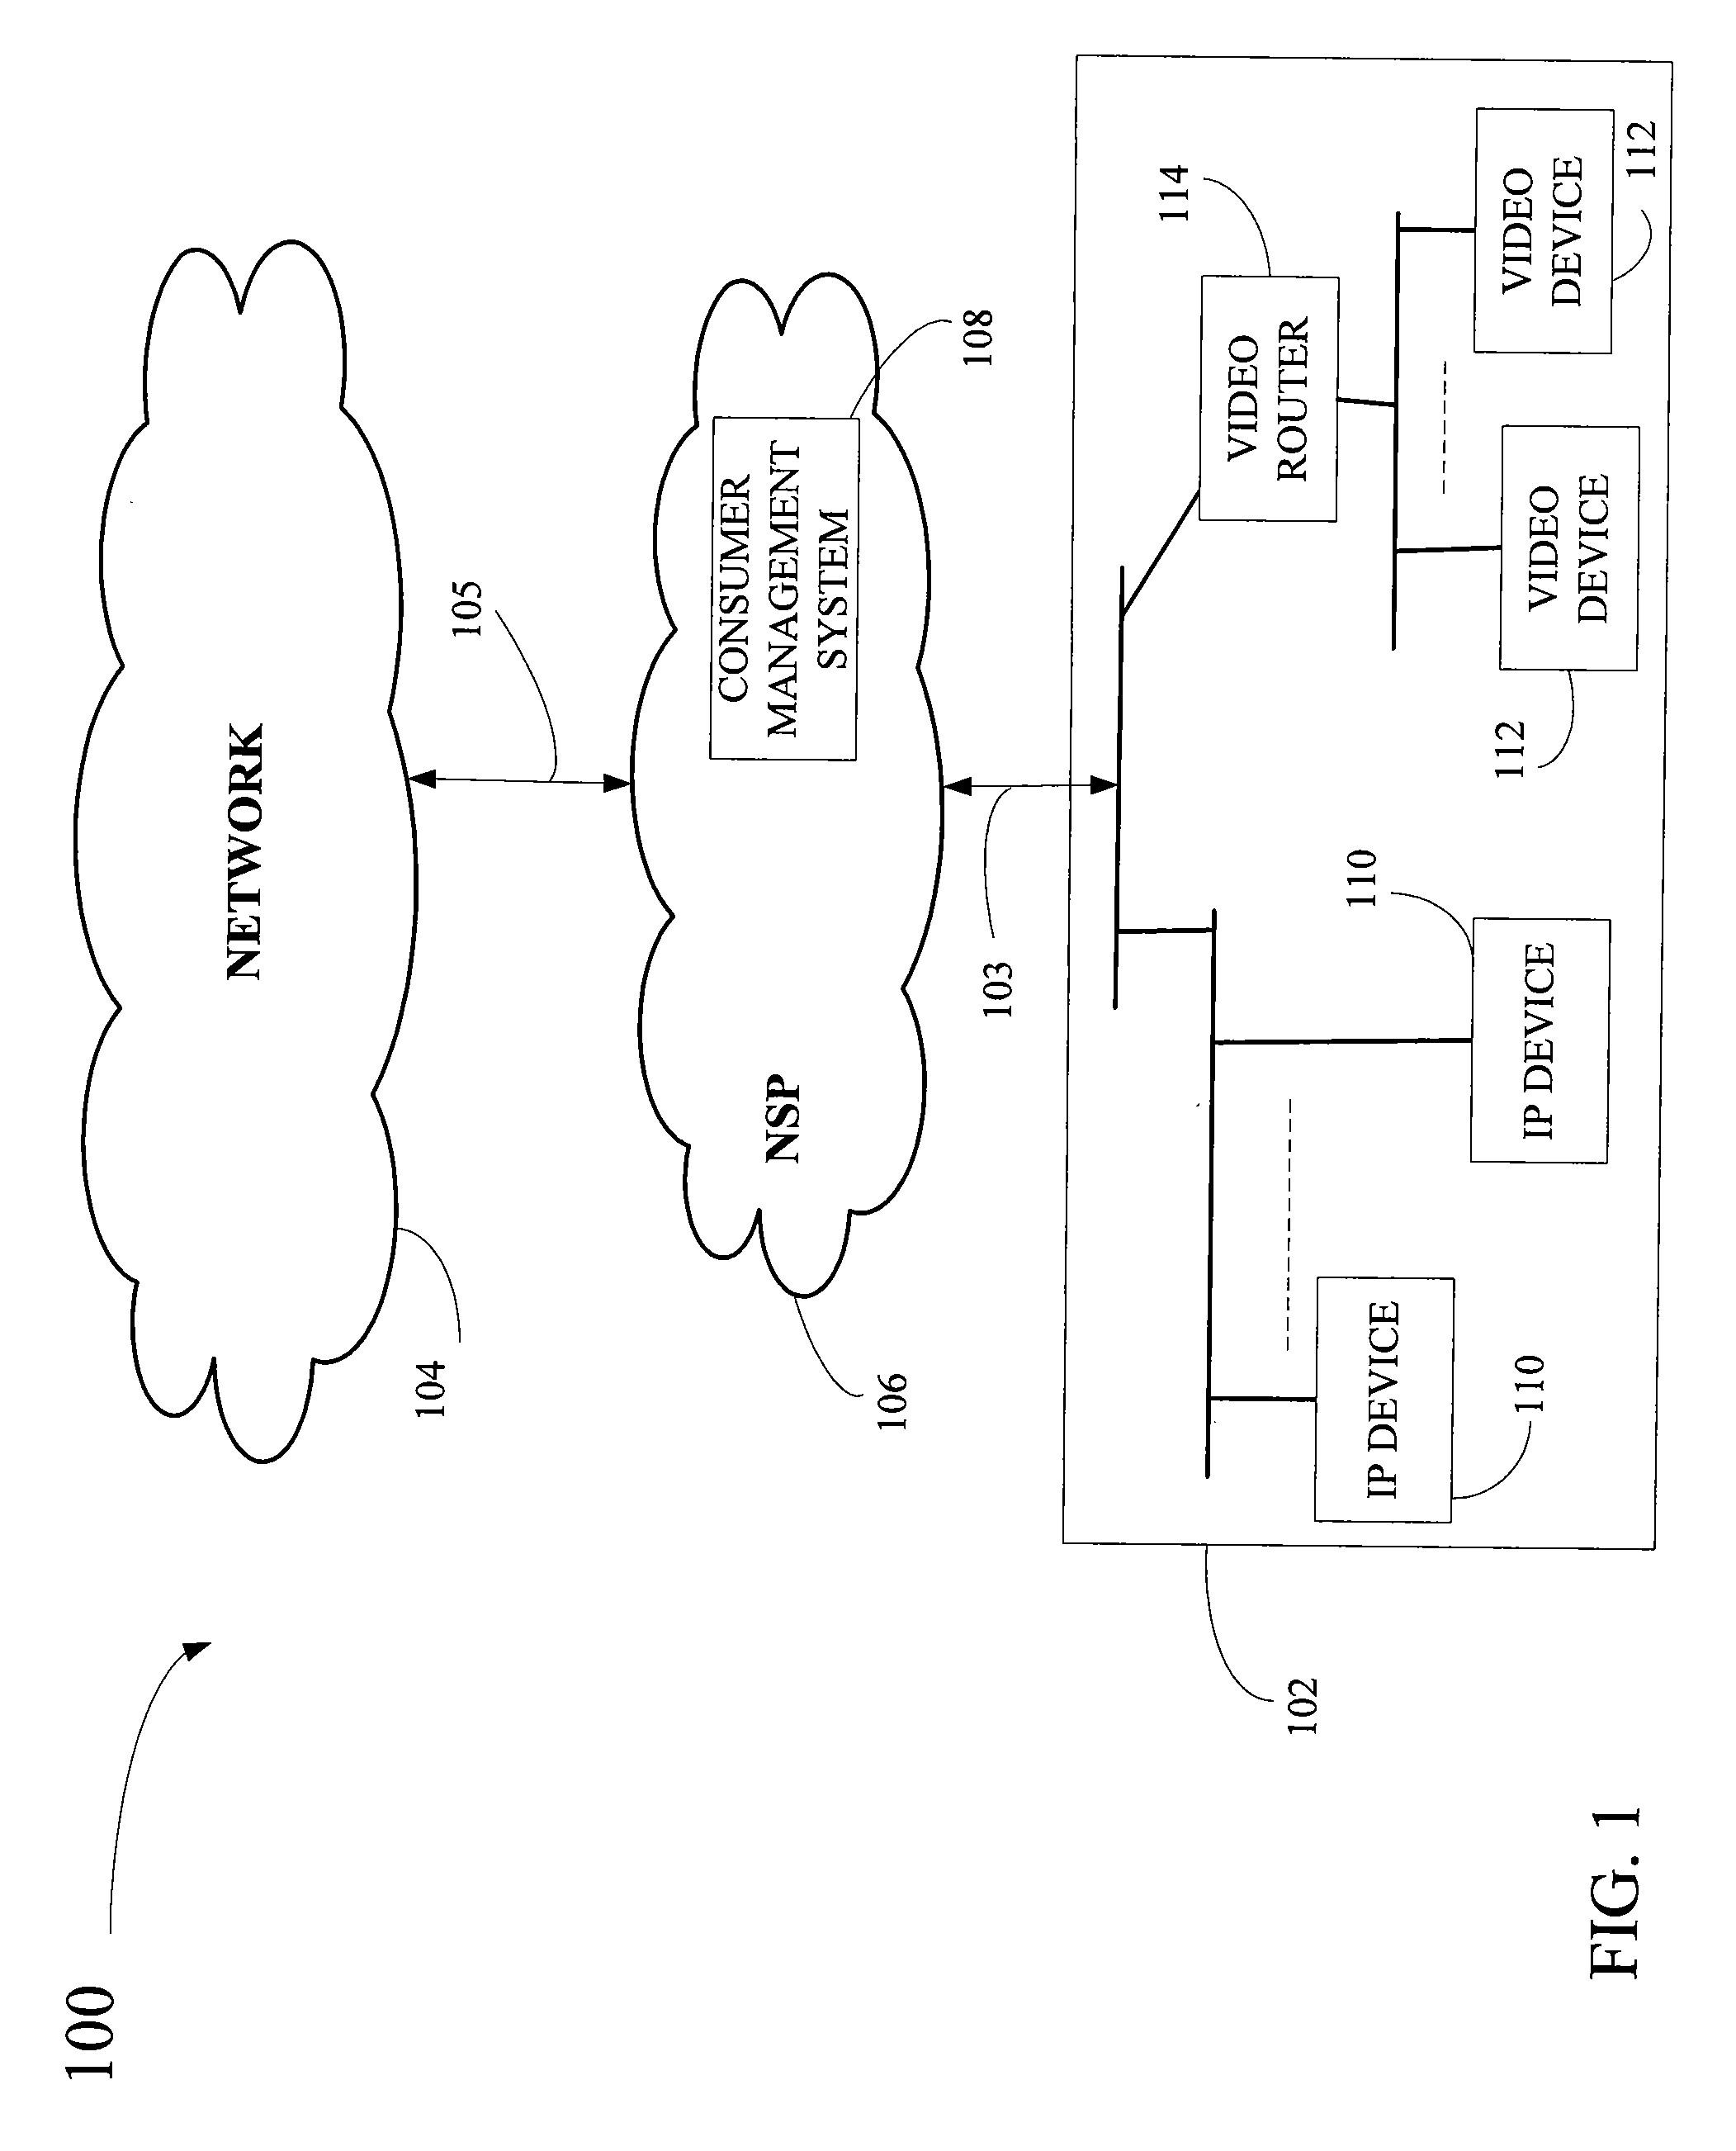 Method and system for customizing information